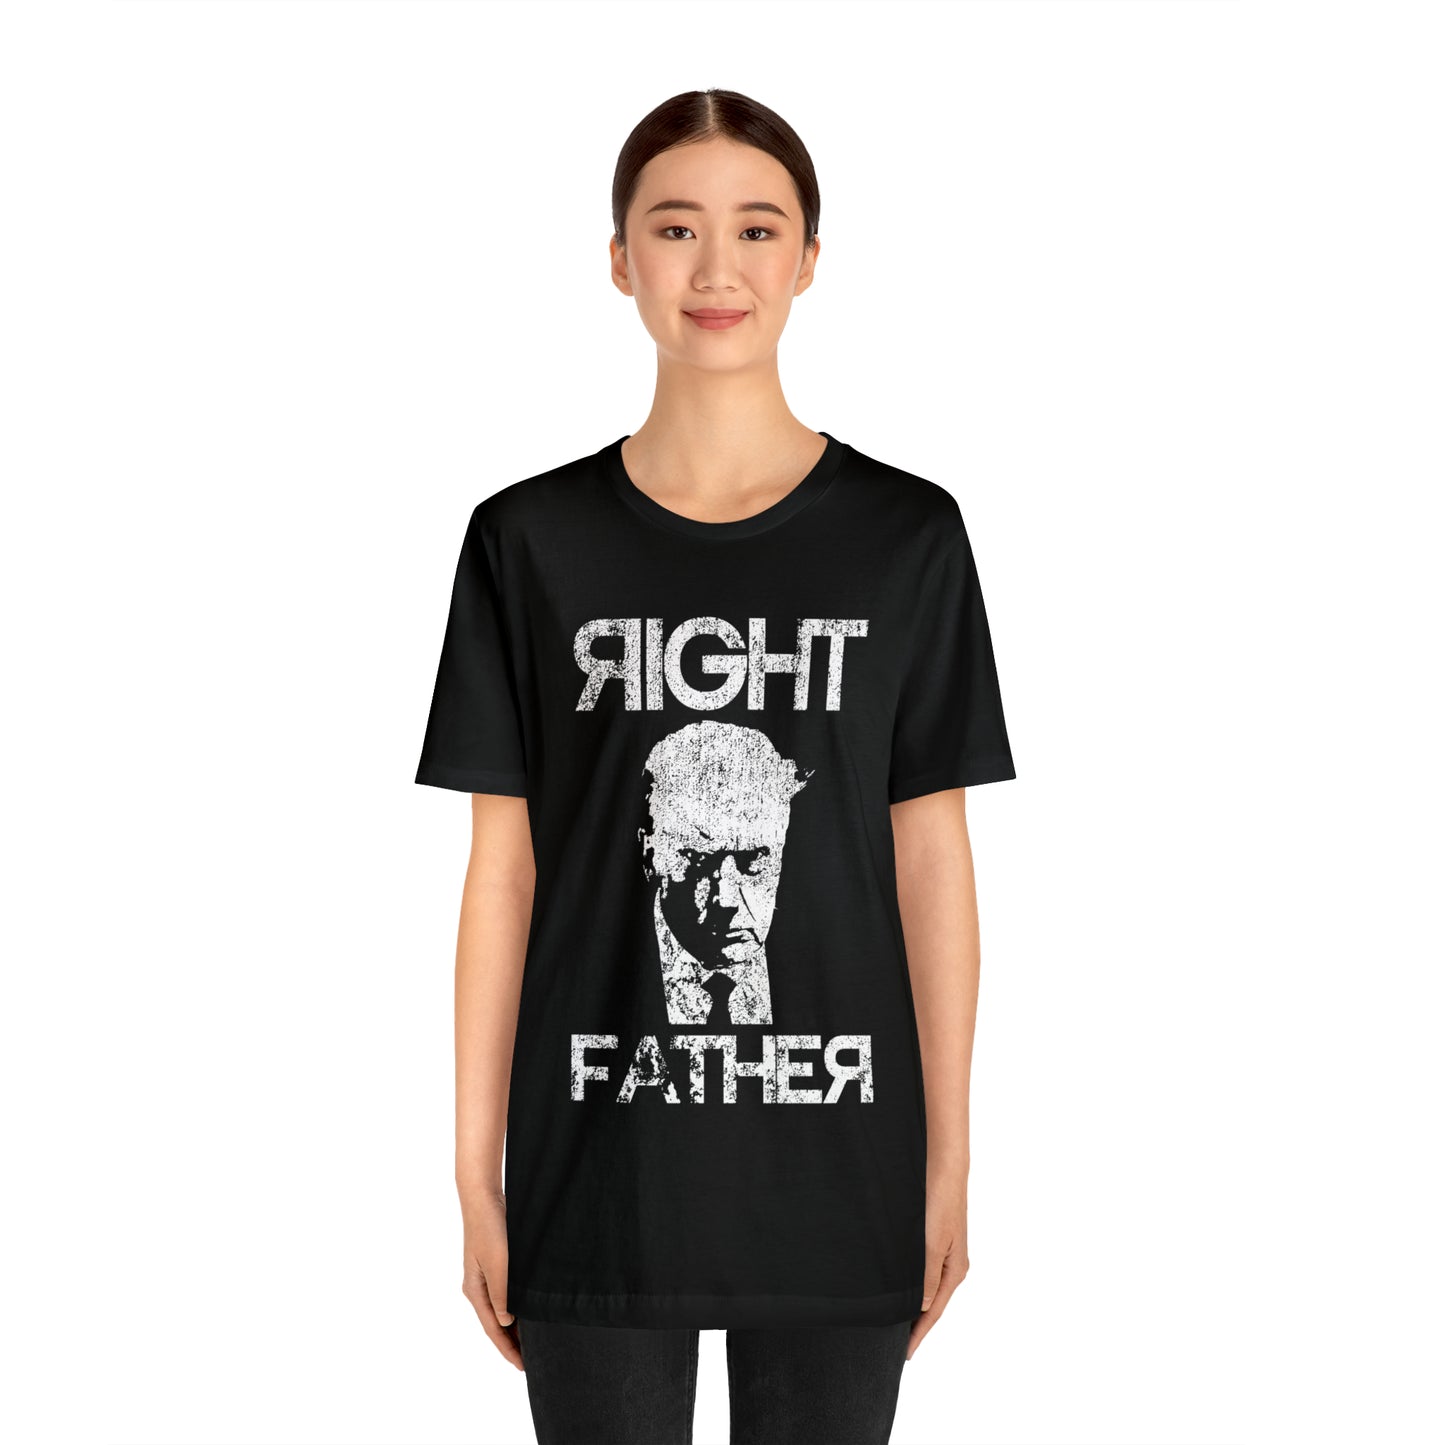 Right Father Short Sleeve Soft Tee